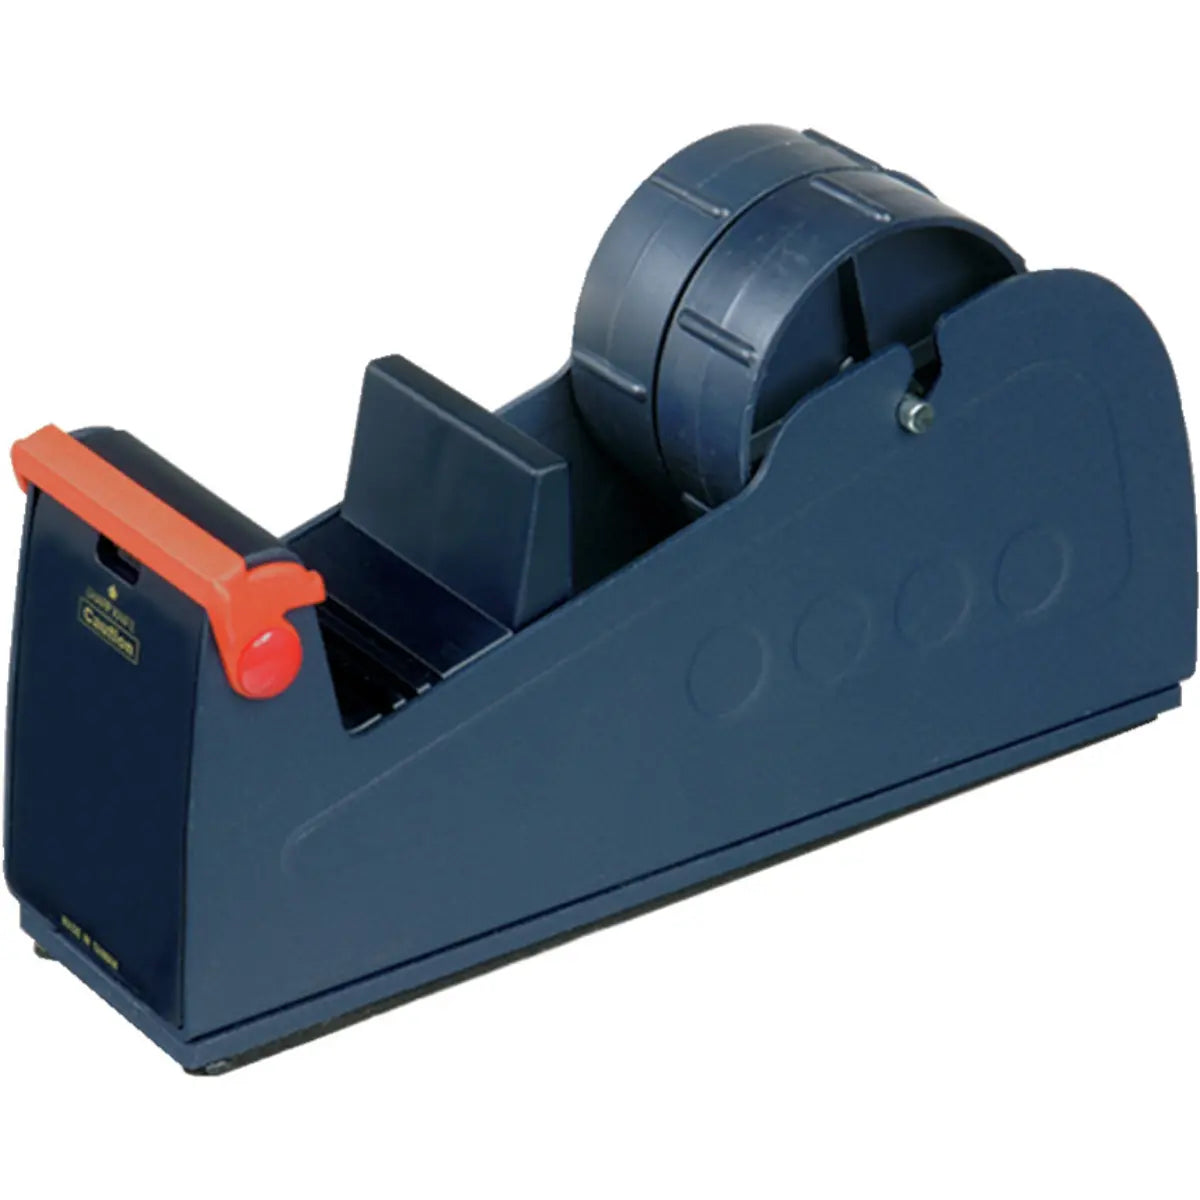 Metal Dual Sellotape Dispenser | Office Stationery | Business | Industrial